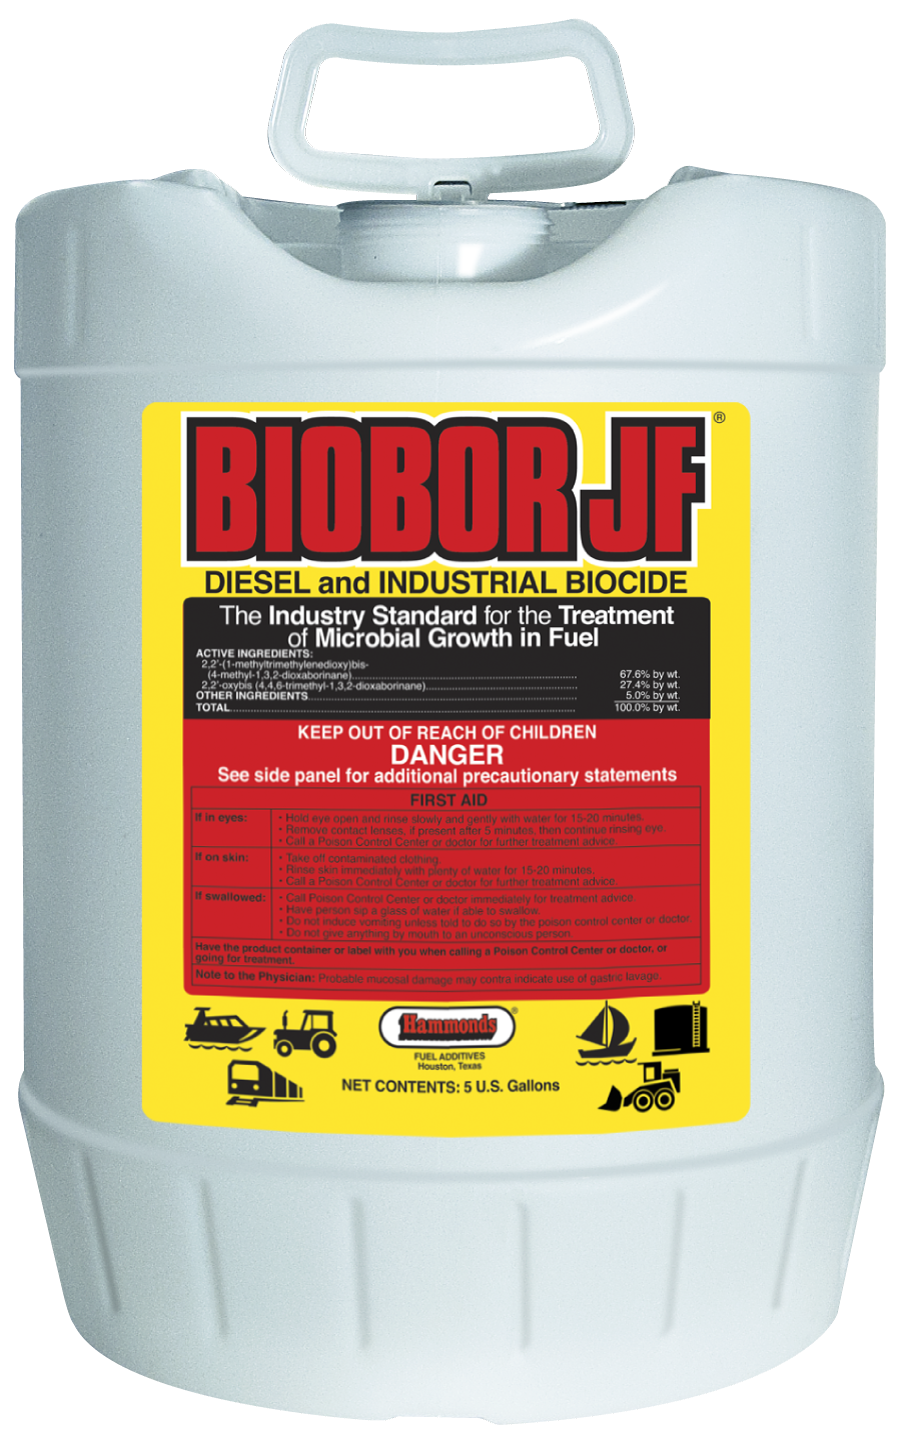 Biobor JF 5 gal. Diesel Biocide and Lubricity Additive Image